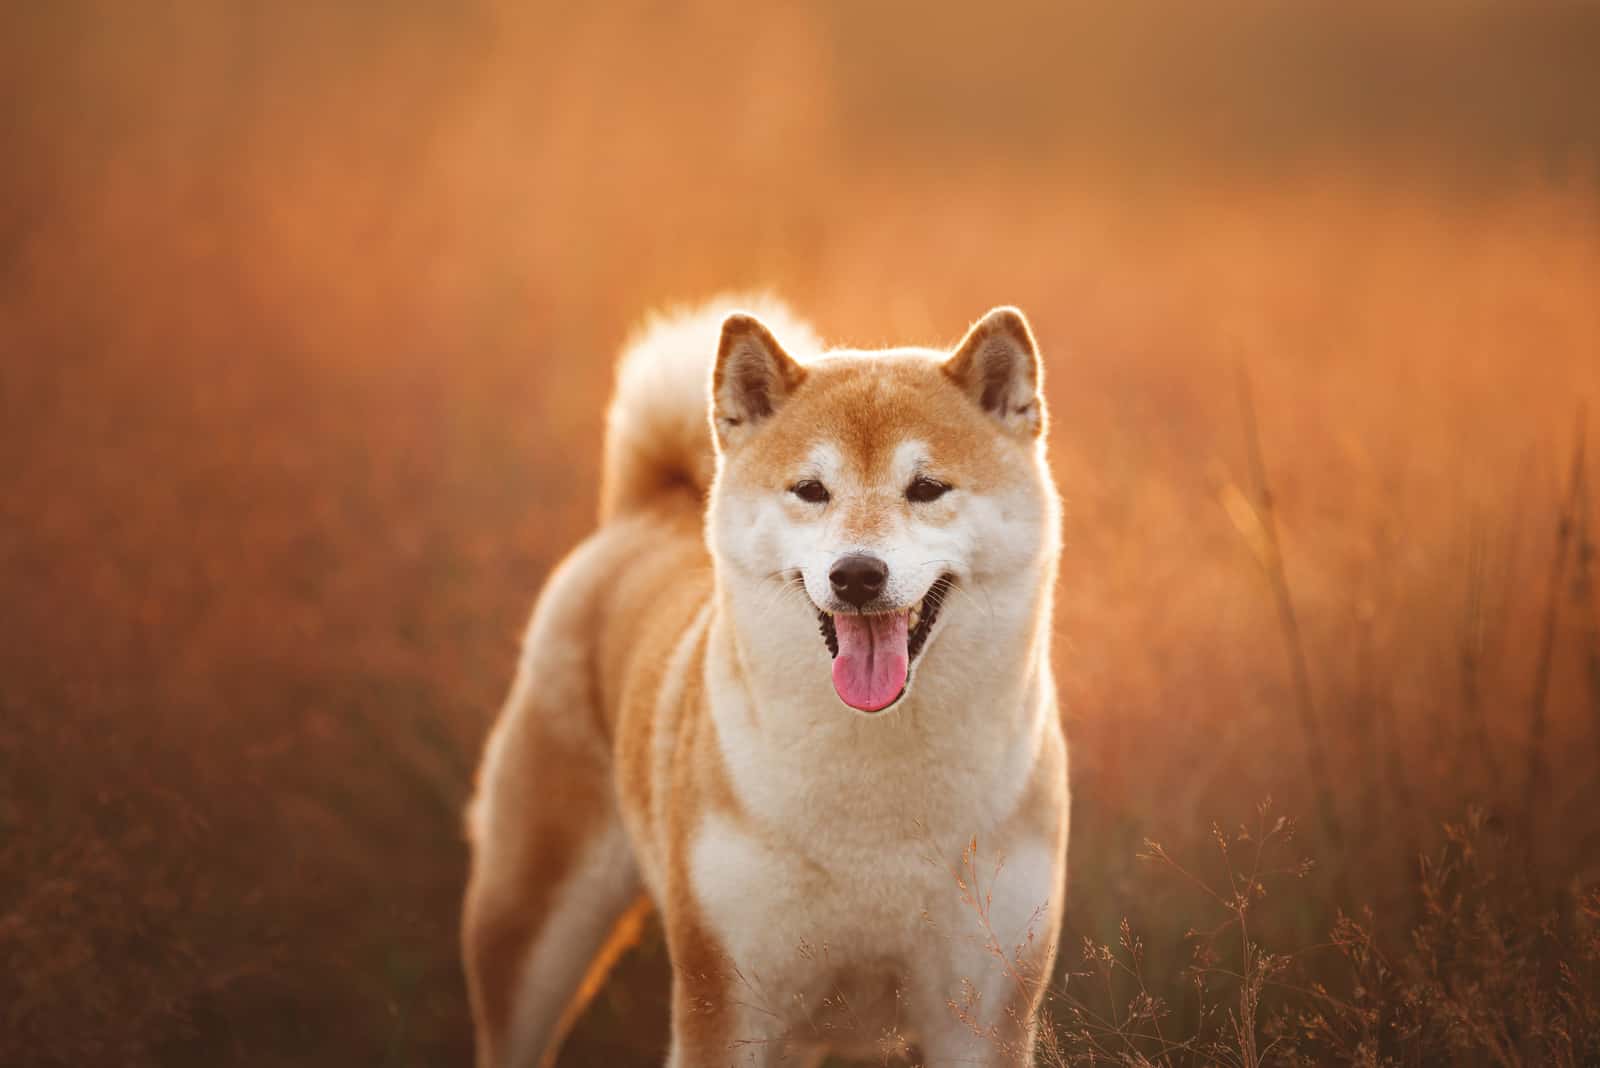 Shiba Inu stands in a grain field with his tongue out